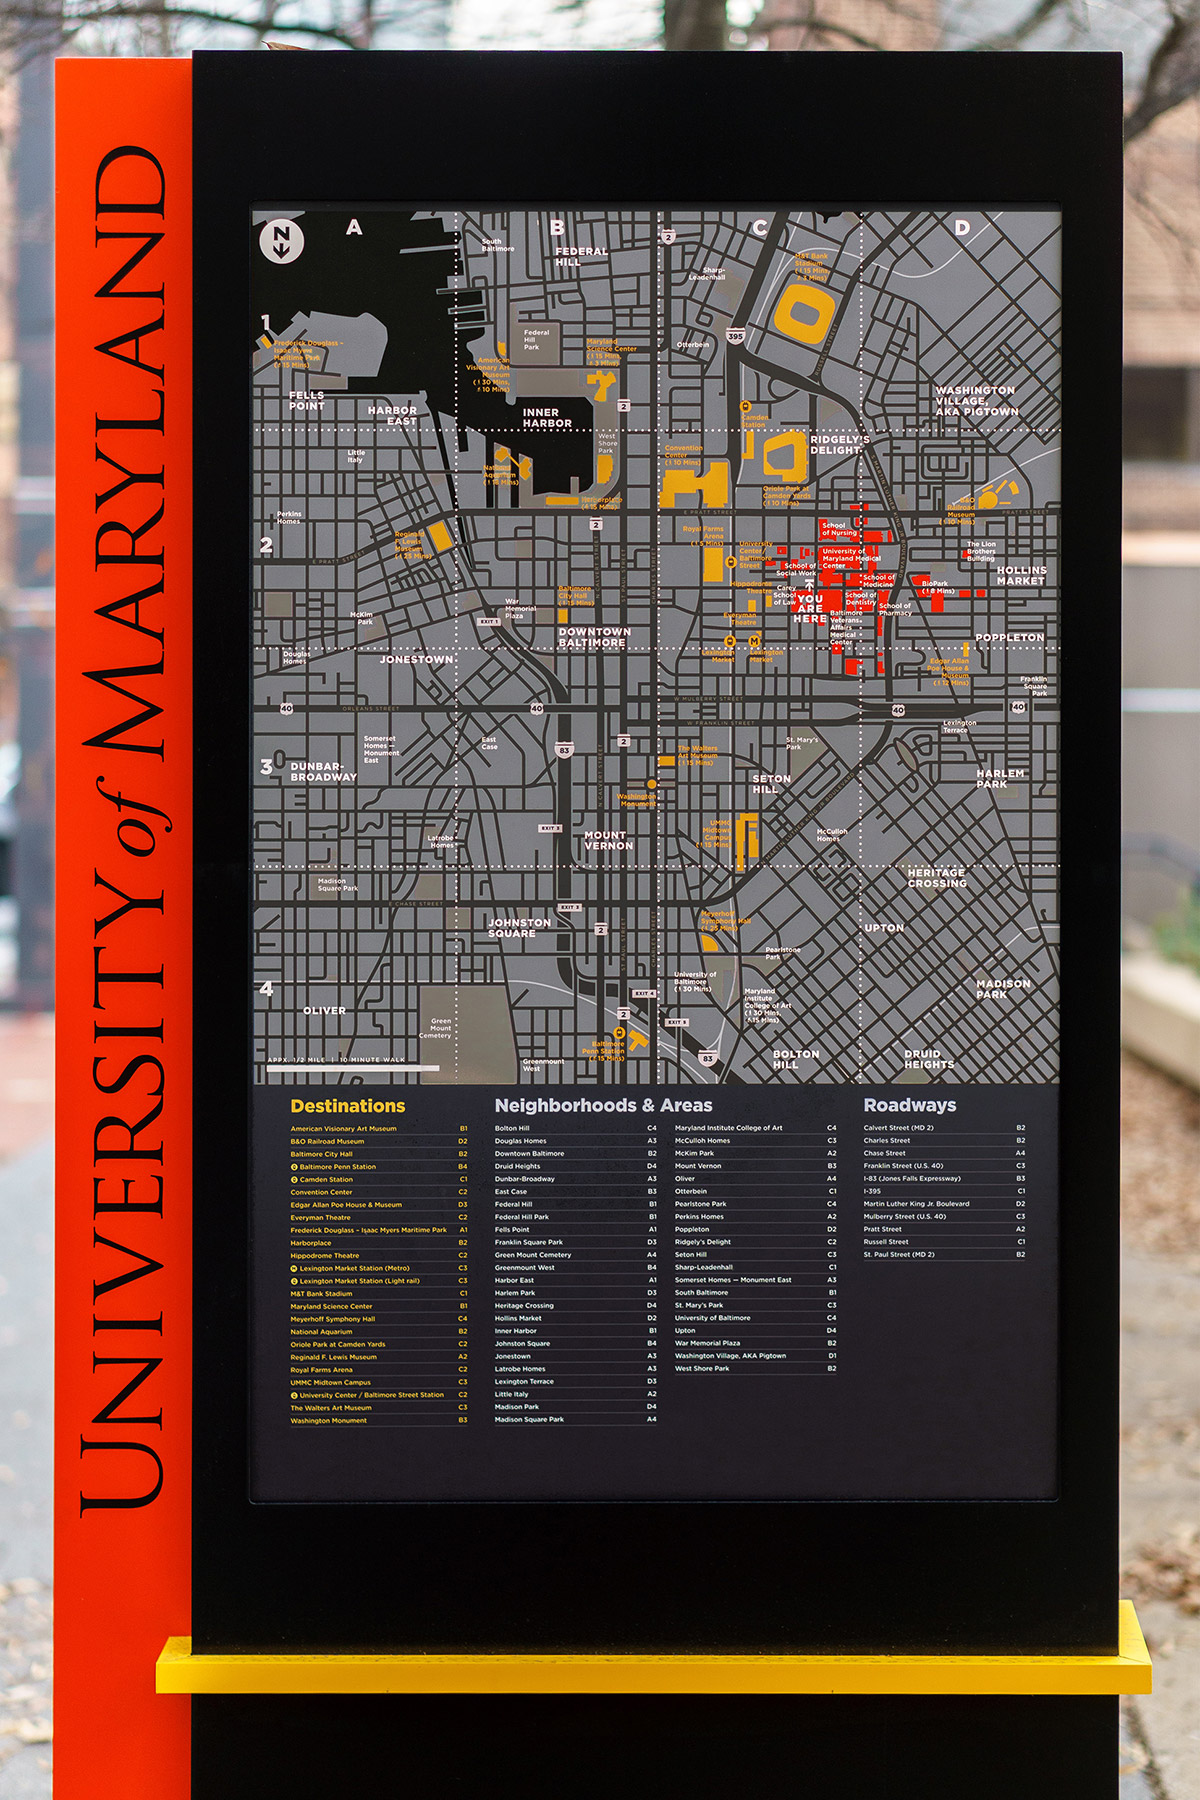 Mapping for The University of Maryland